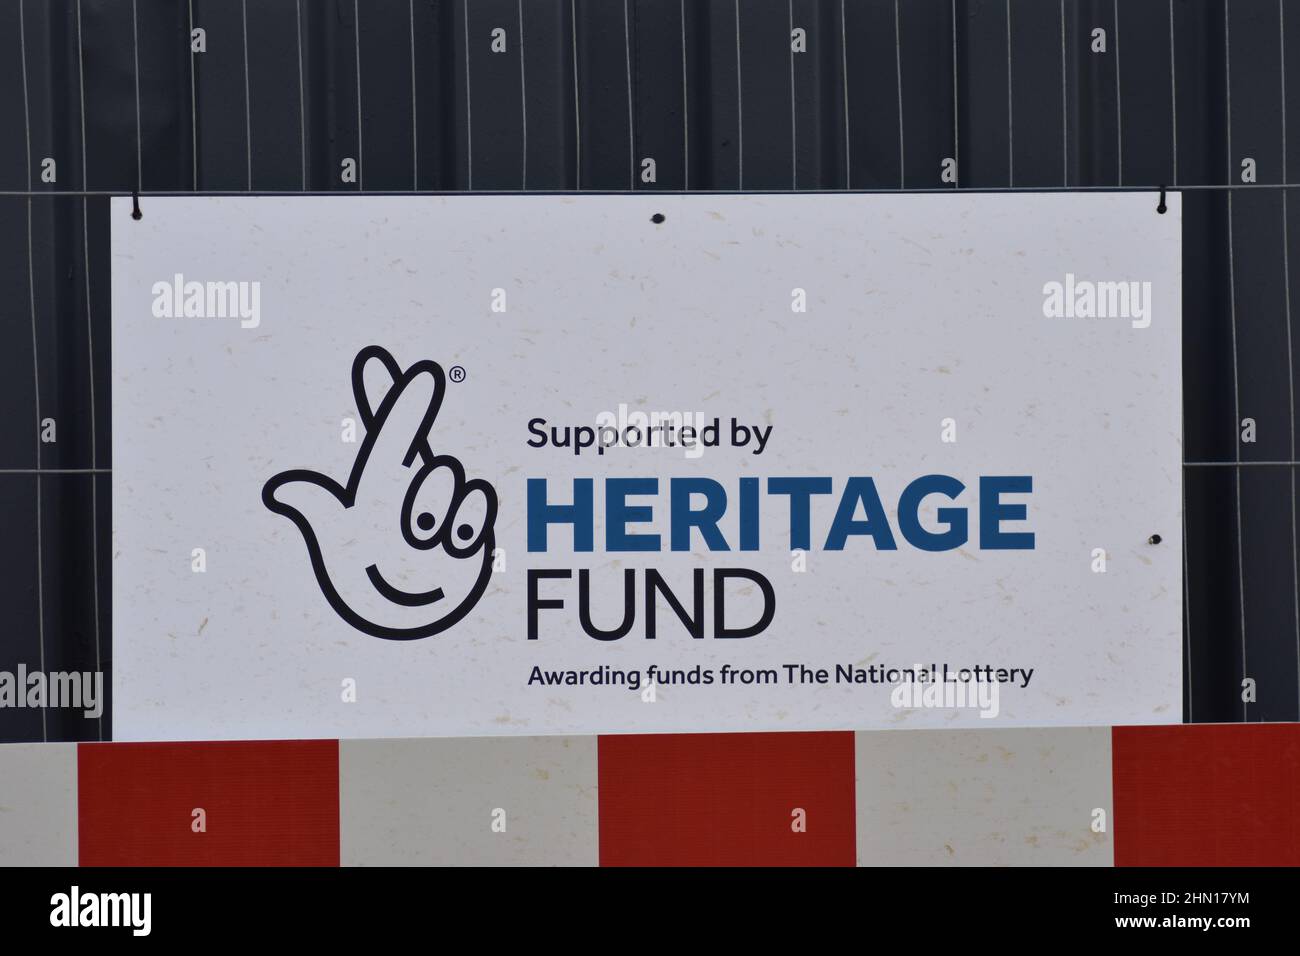 Sign at a building site: Supported by Heritage Fund Awarding funds from The National Lottery. Stock Photo